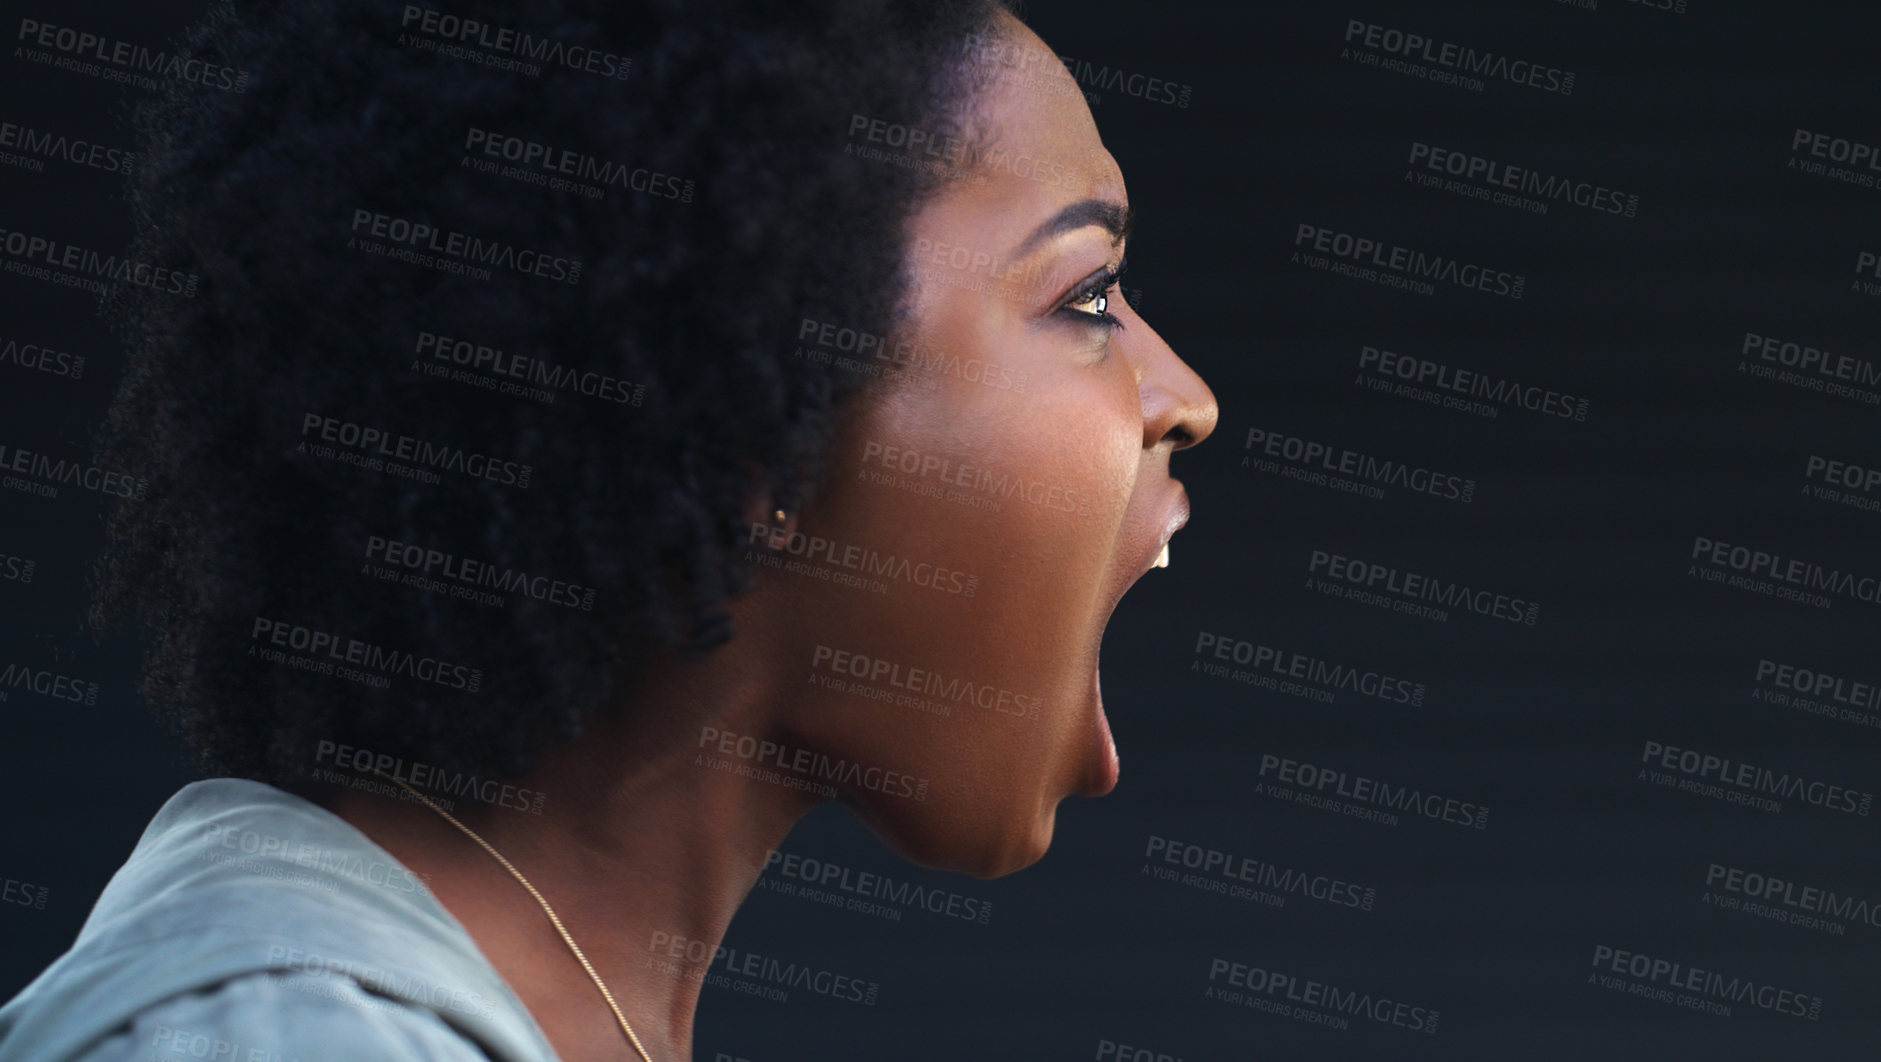 Buy stock photo Cropped shot of a woman shouting against a dark background